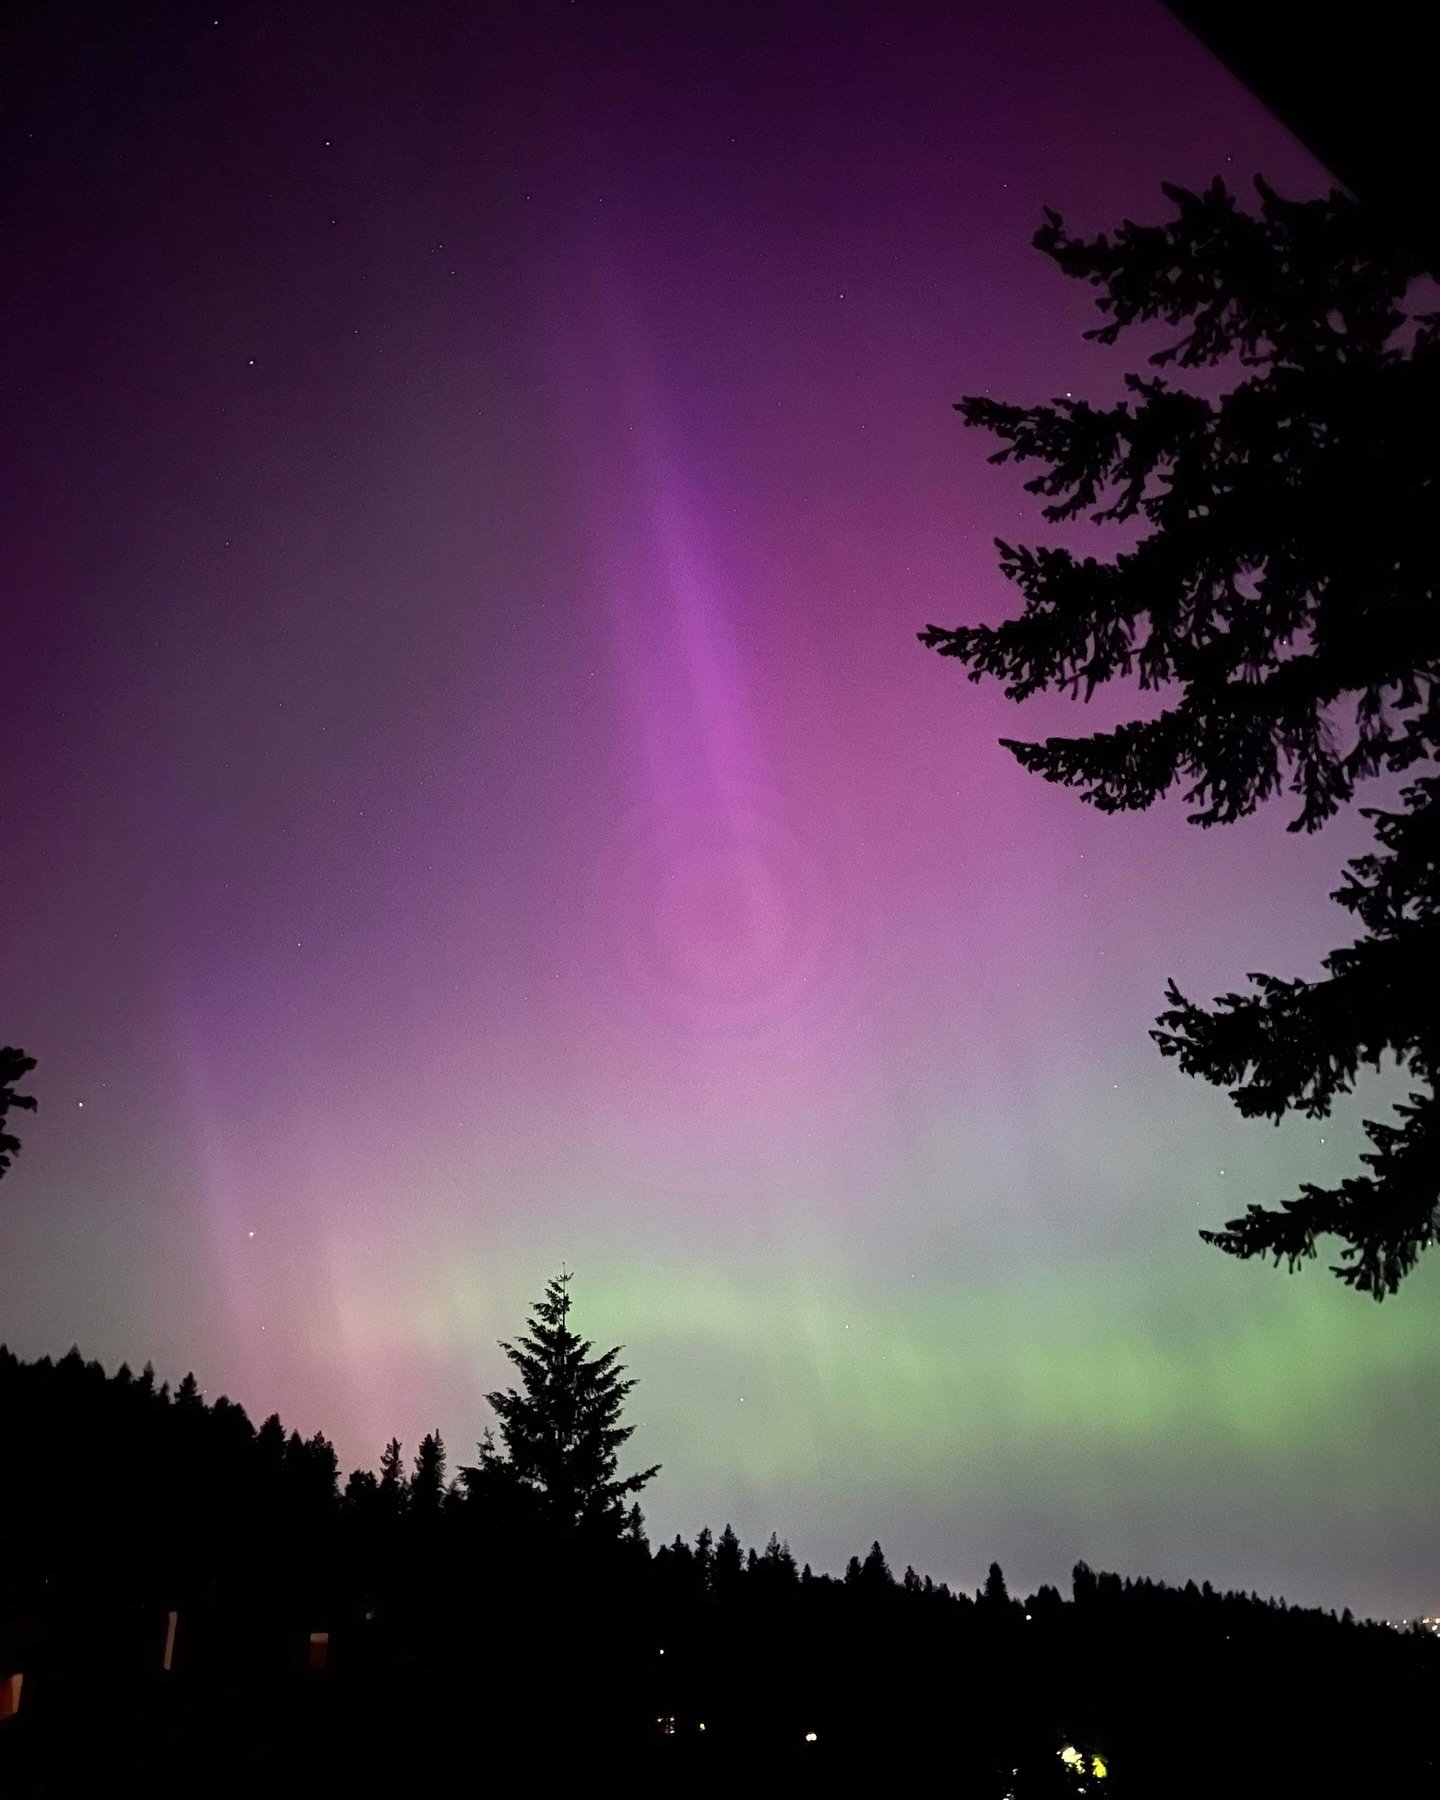 Saw all the excitement around the aurora borealis and felt inspired to share this prayer:
God of Mystery, you made the universe with its marvelous order and chaos, its atoms, worlds, and galaxies, and the infinite complexity of living creatures. We g